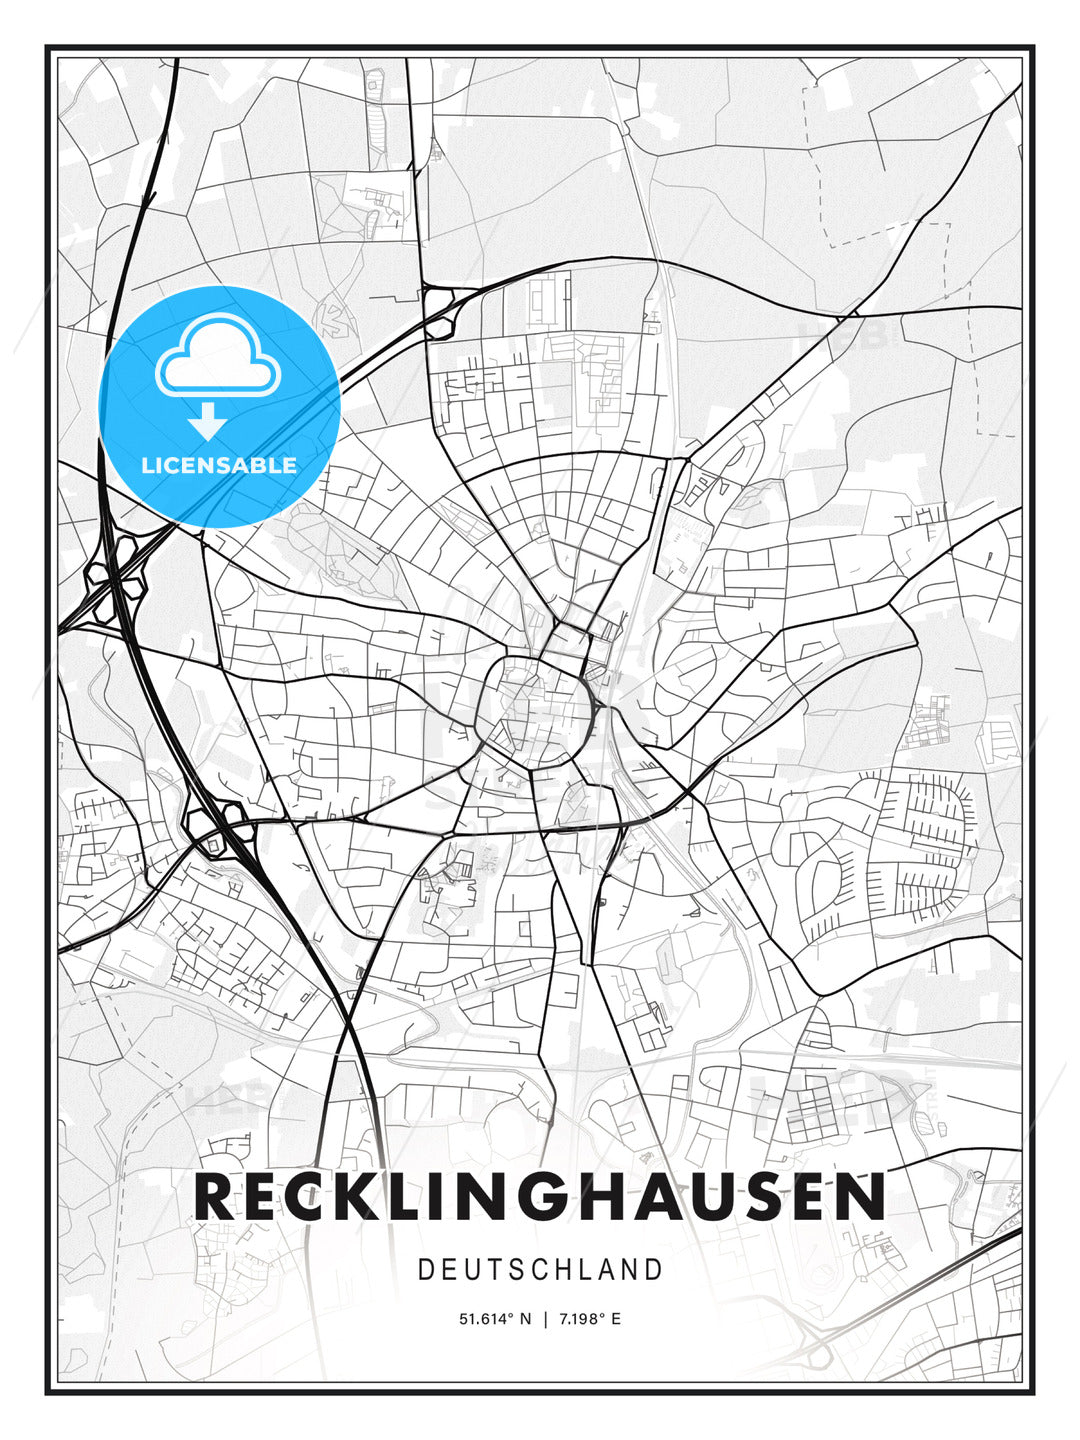 Recklinghausen, Germany, Modern Print Template in Various Formats - HEBSTREITS Sketches